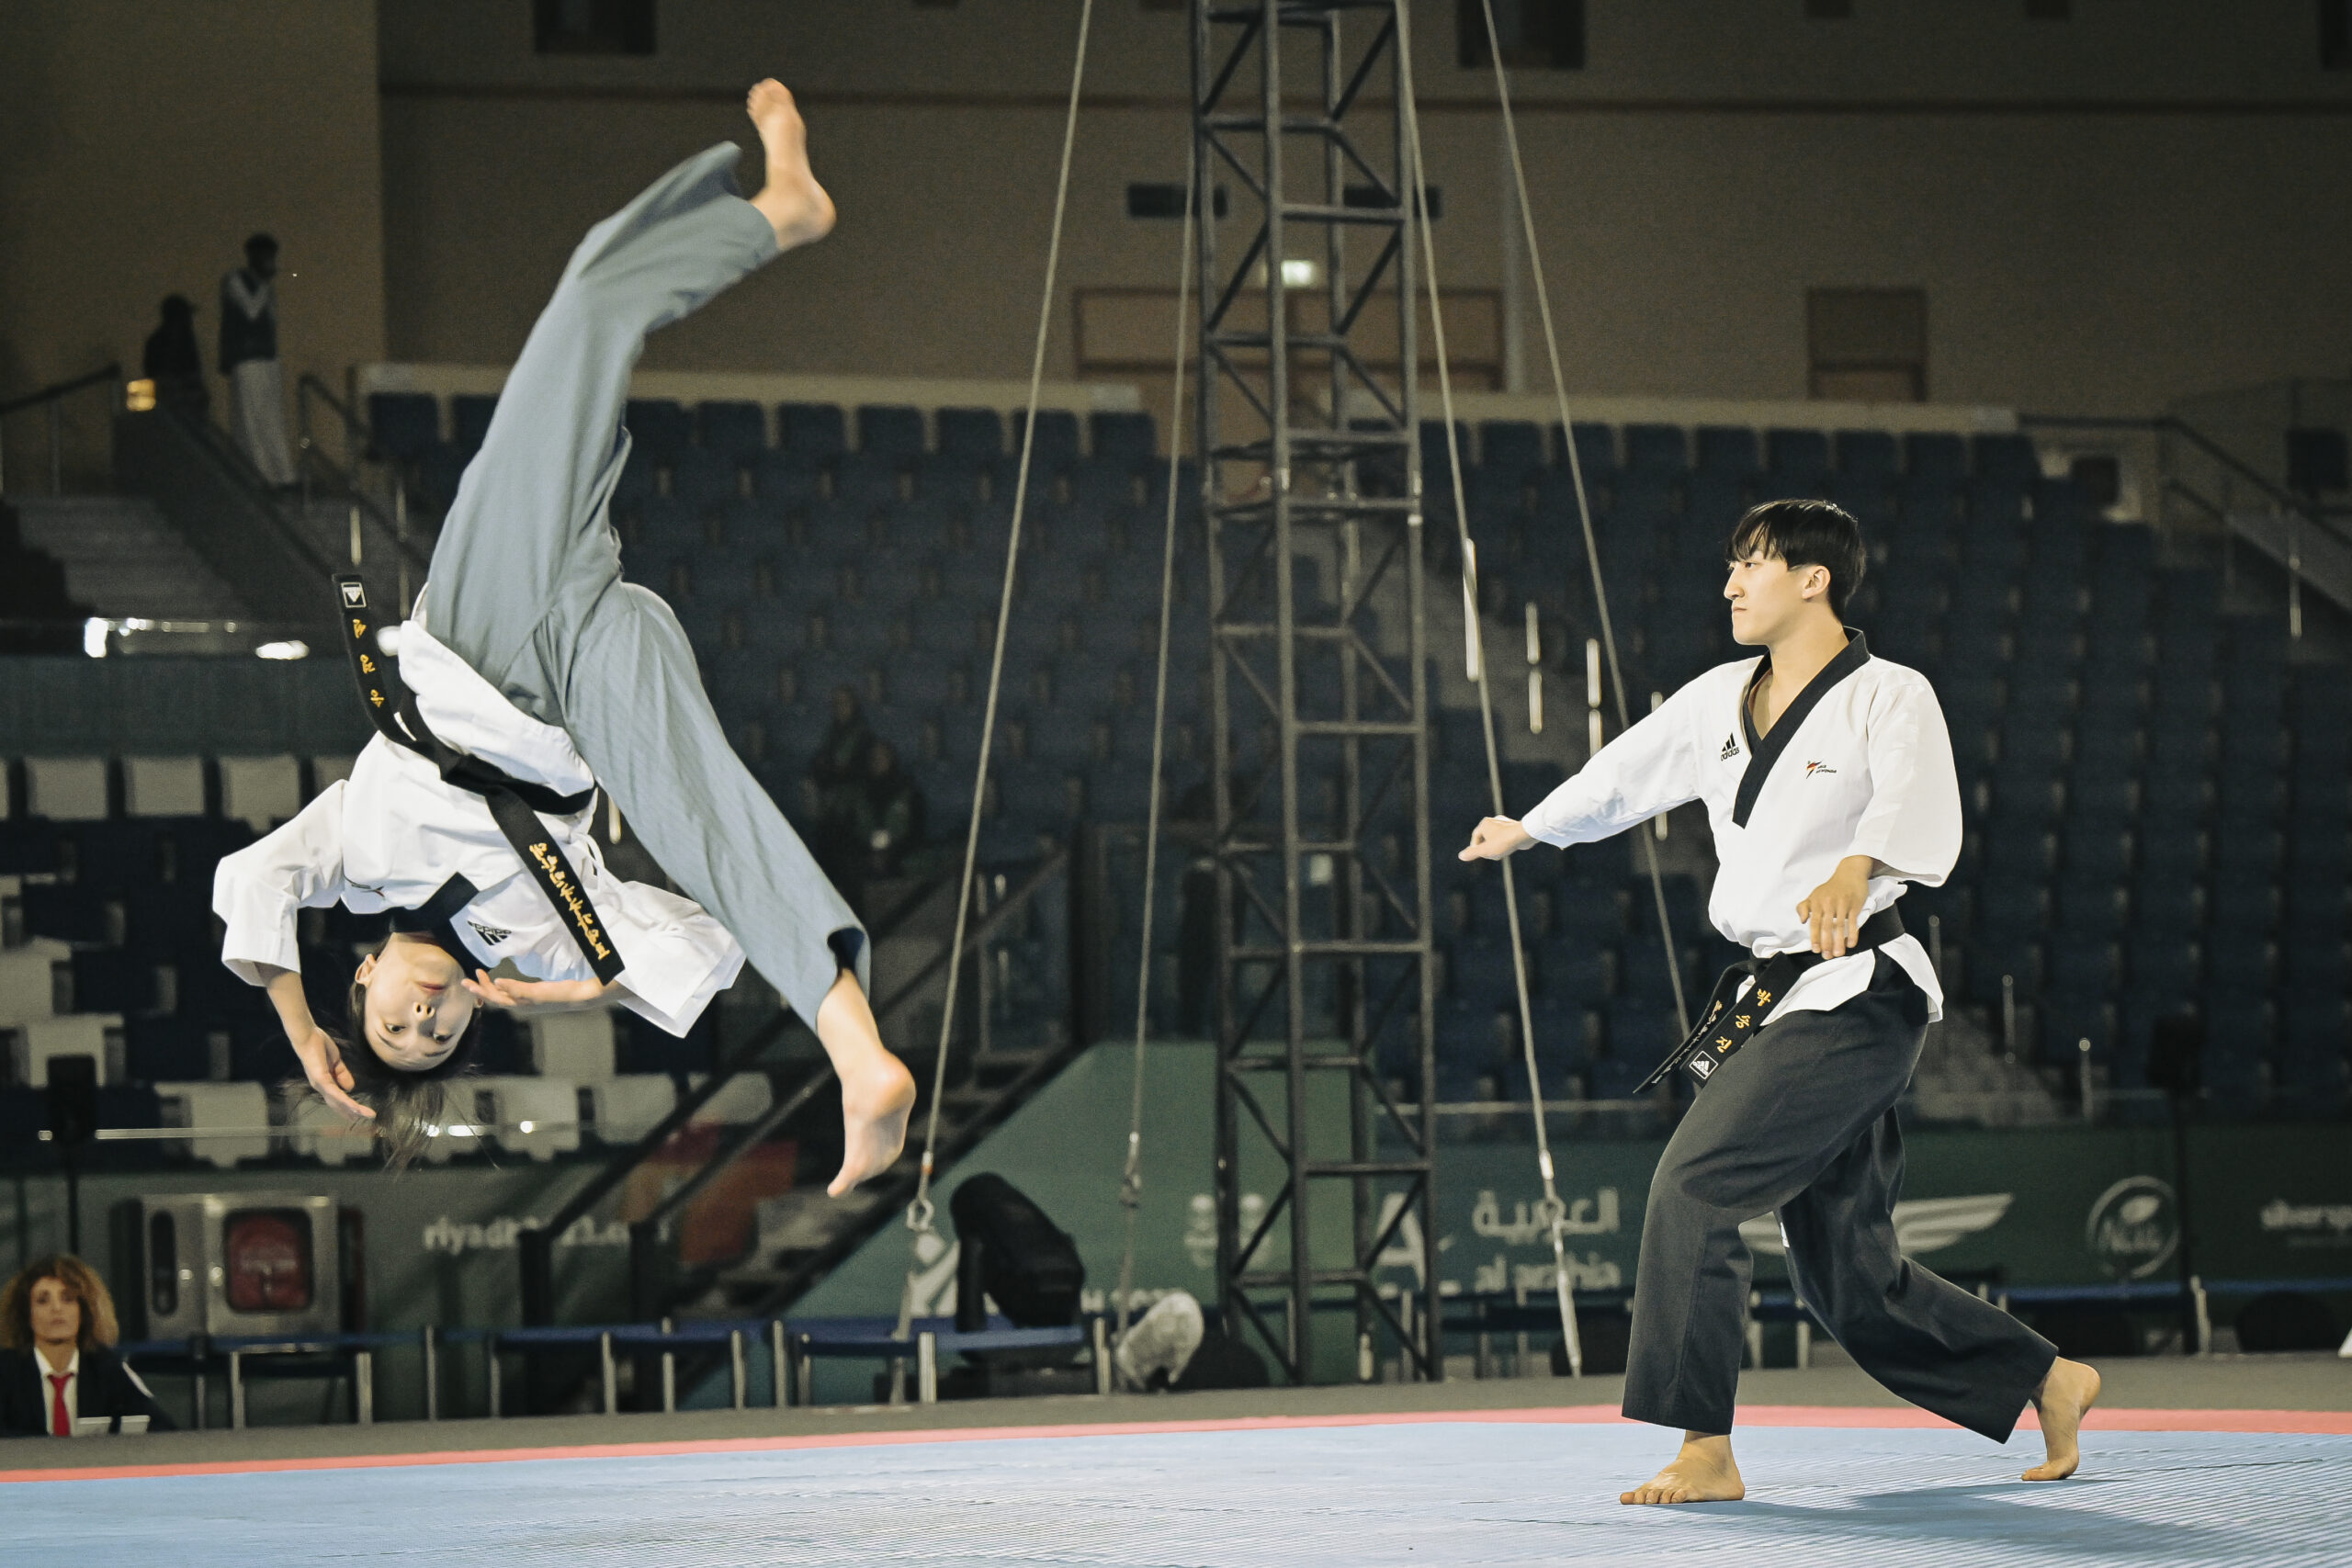 Freestyle Poomsae steals the show on day two of Taekwondo at World Combat Games